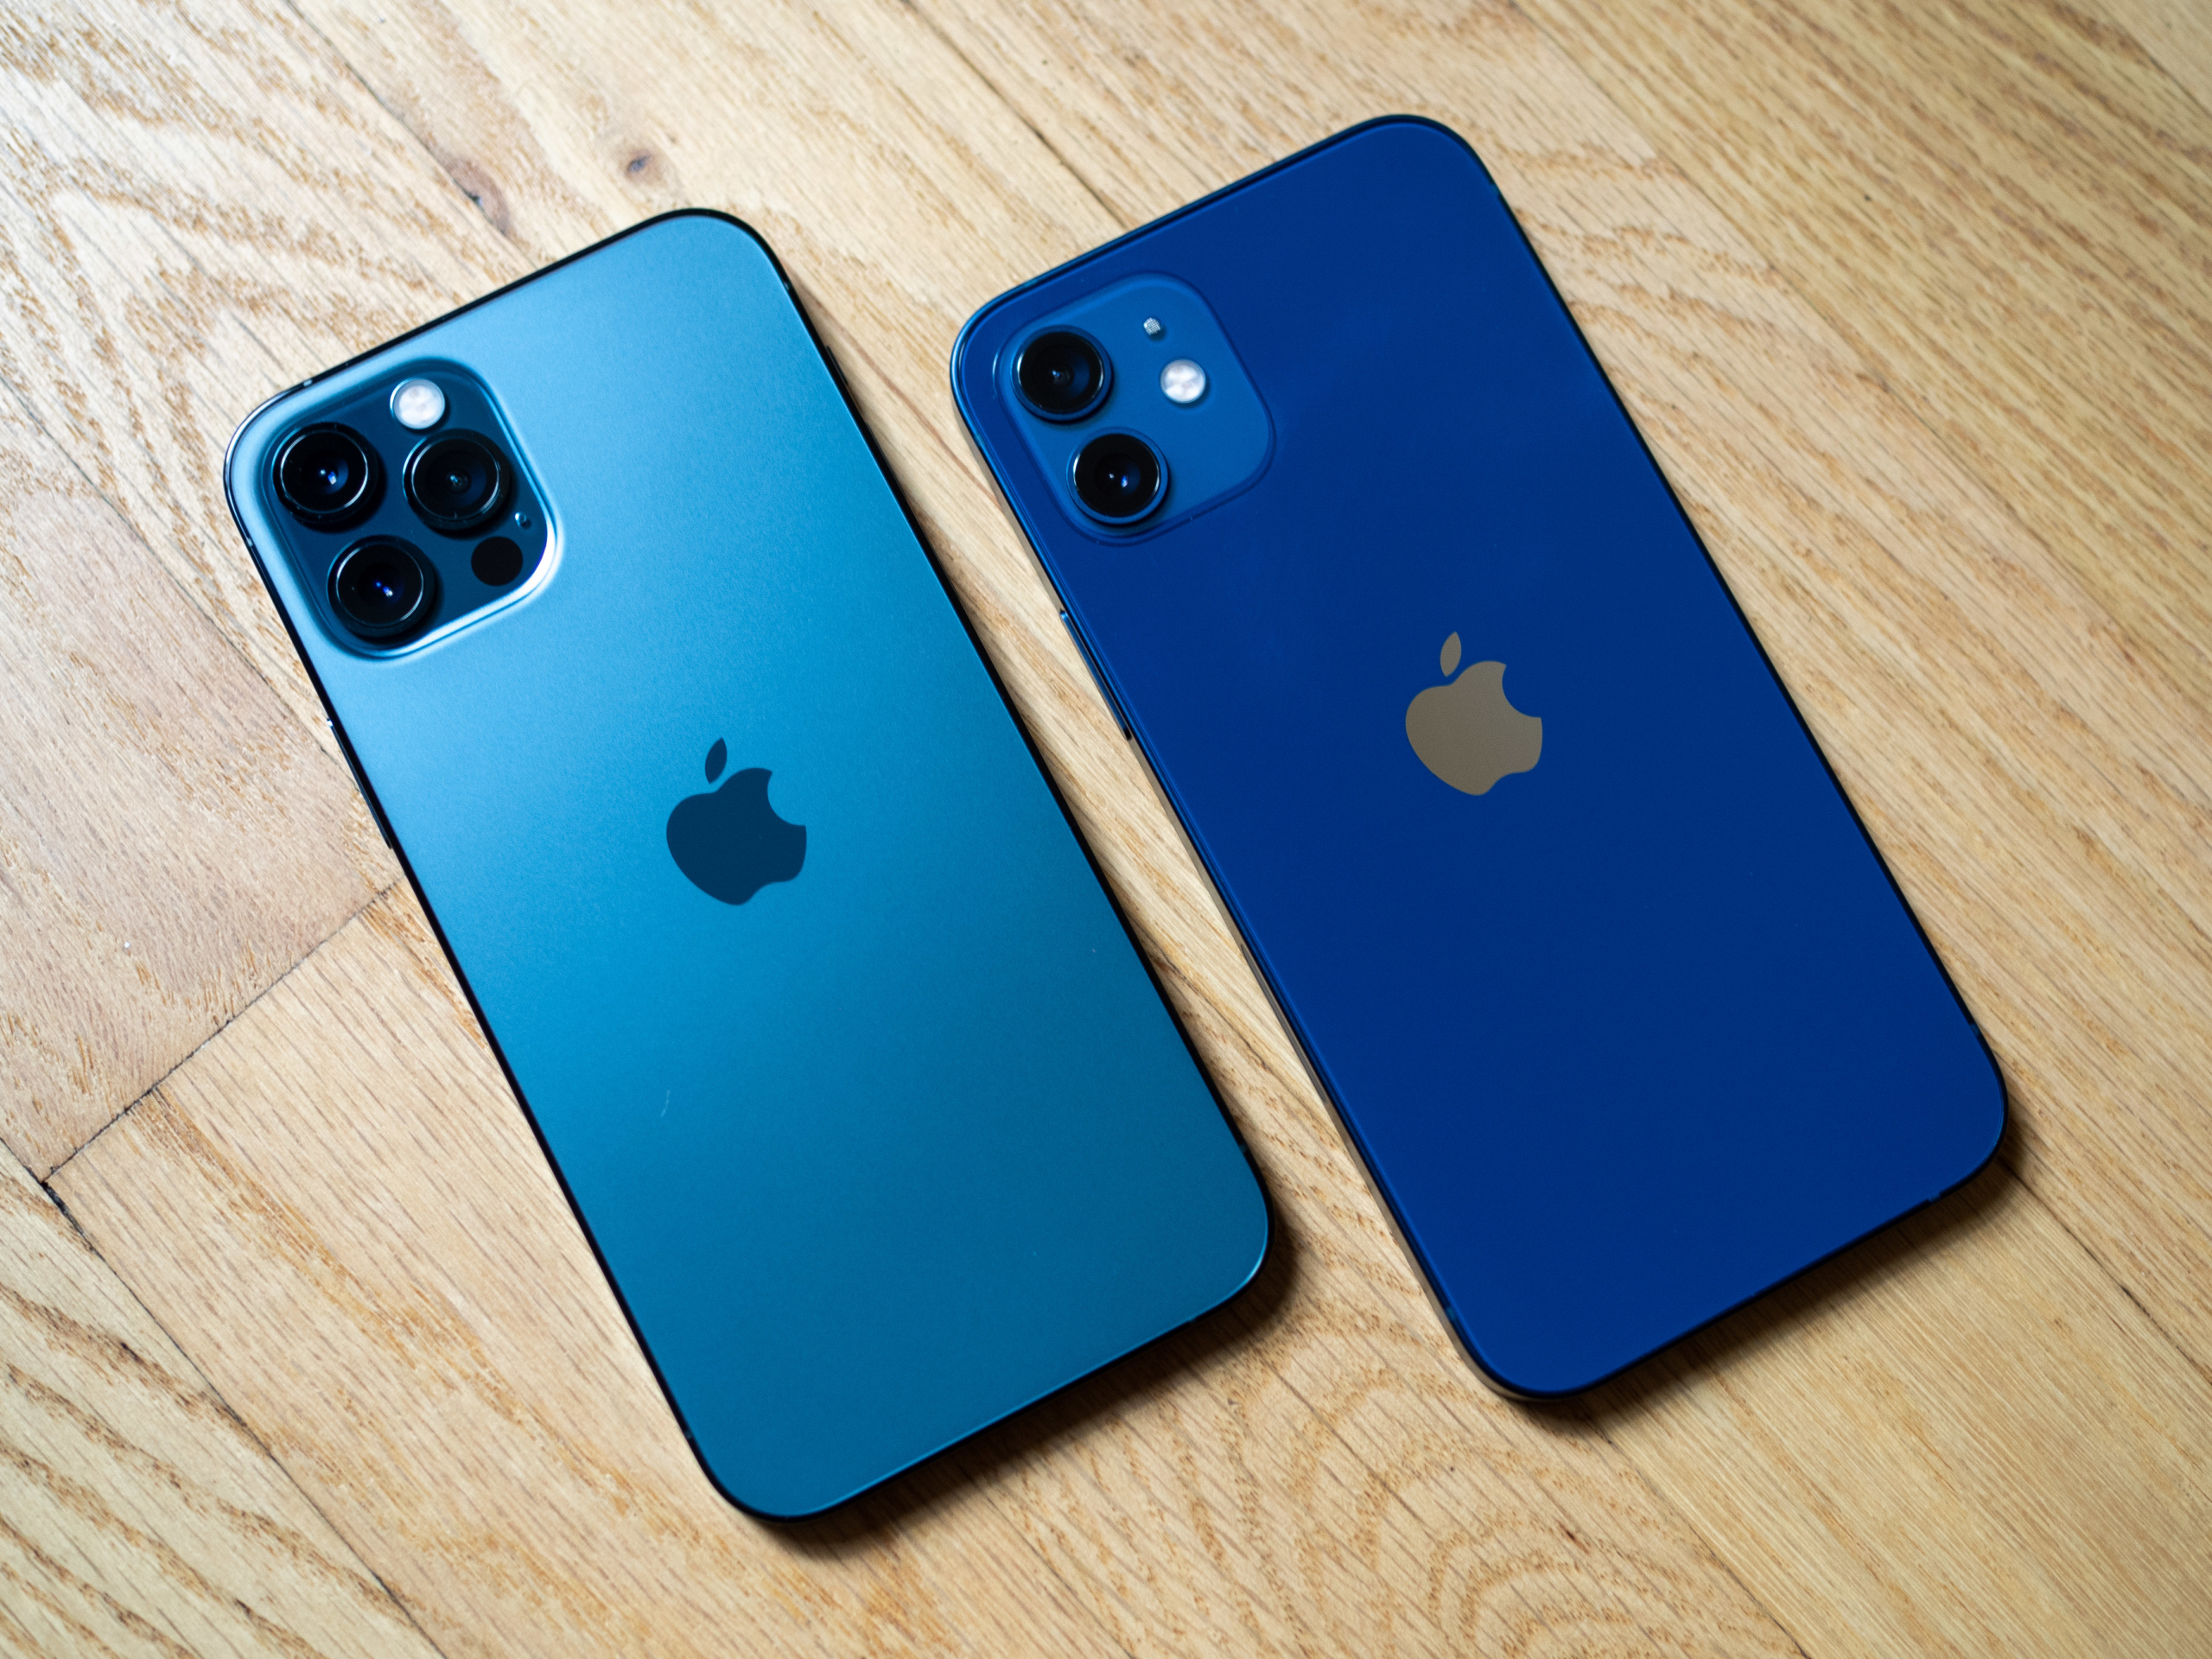 iPhone 12 and iPhone 12 Pro